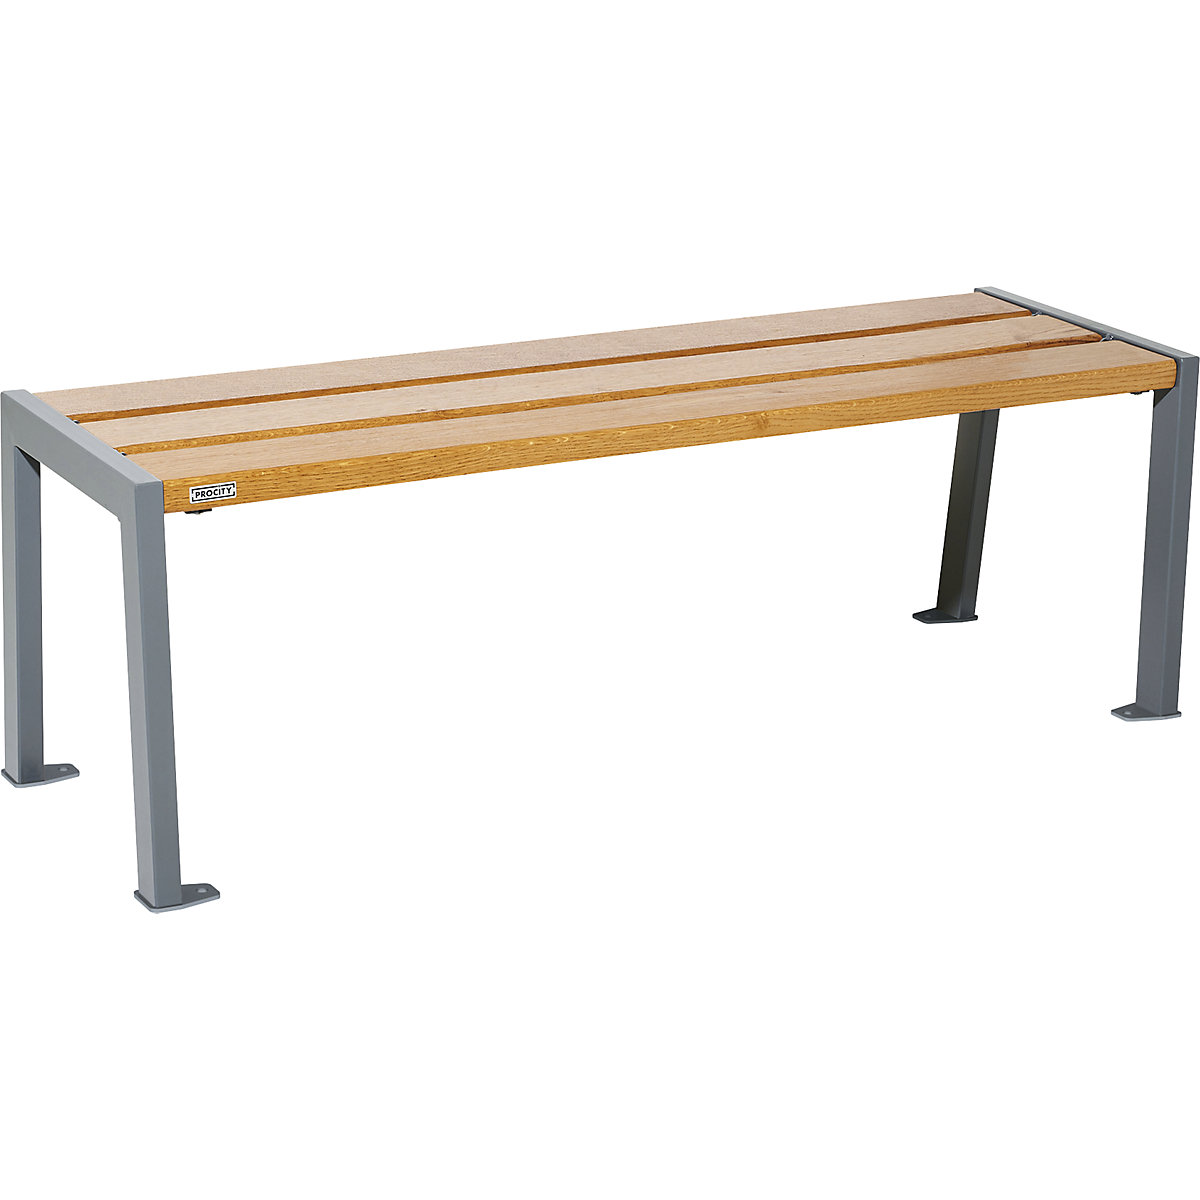 SILAOS® wooden bench without back rest - PROCITY